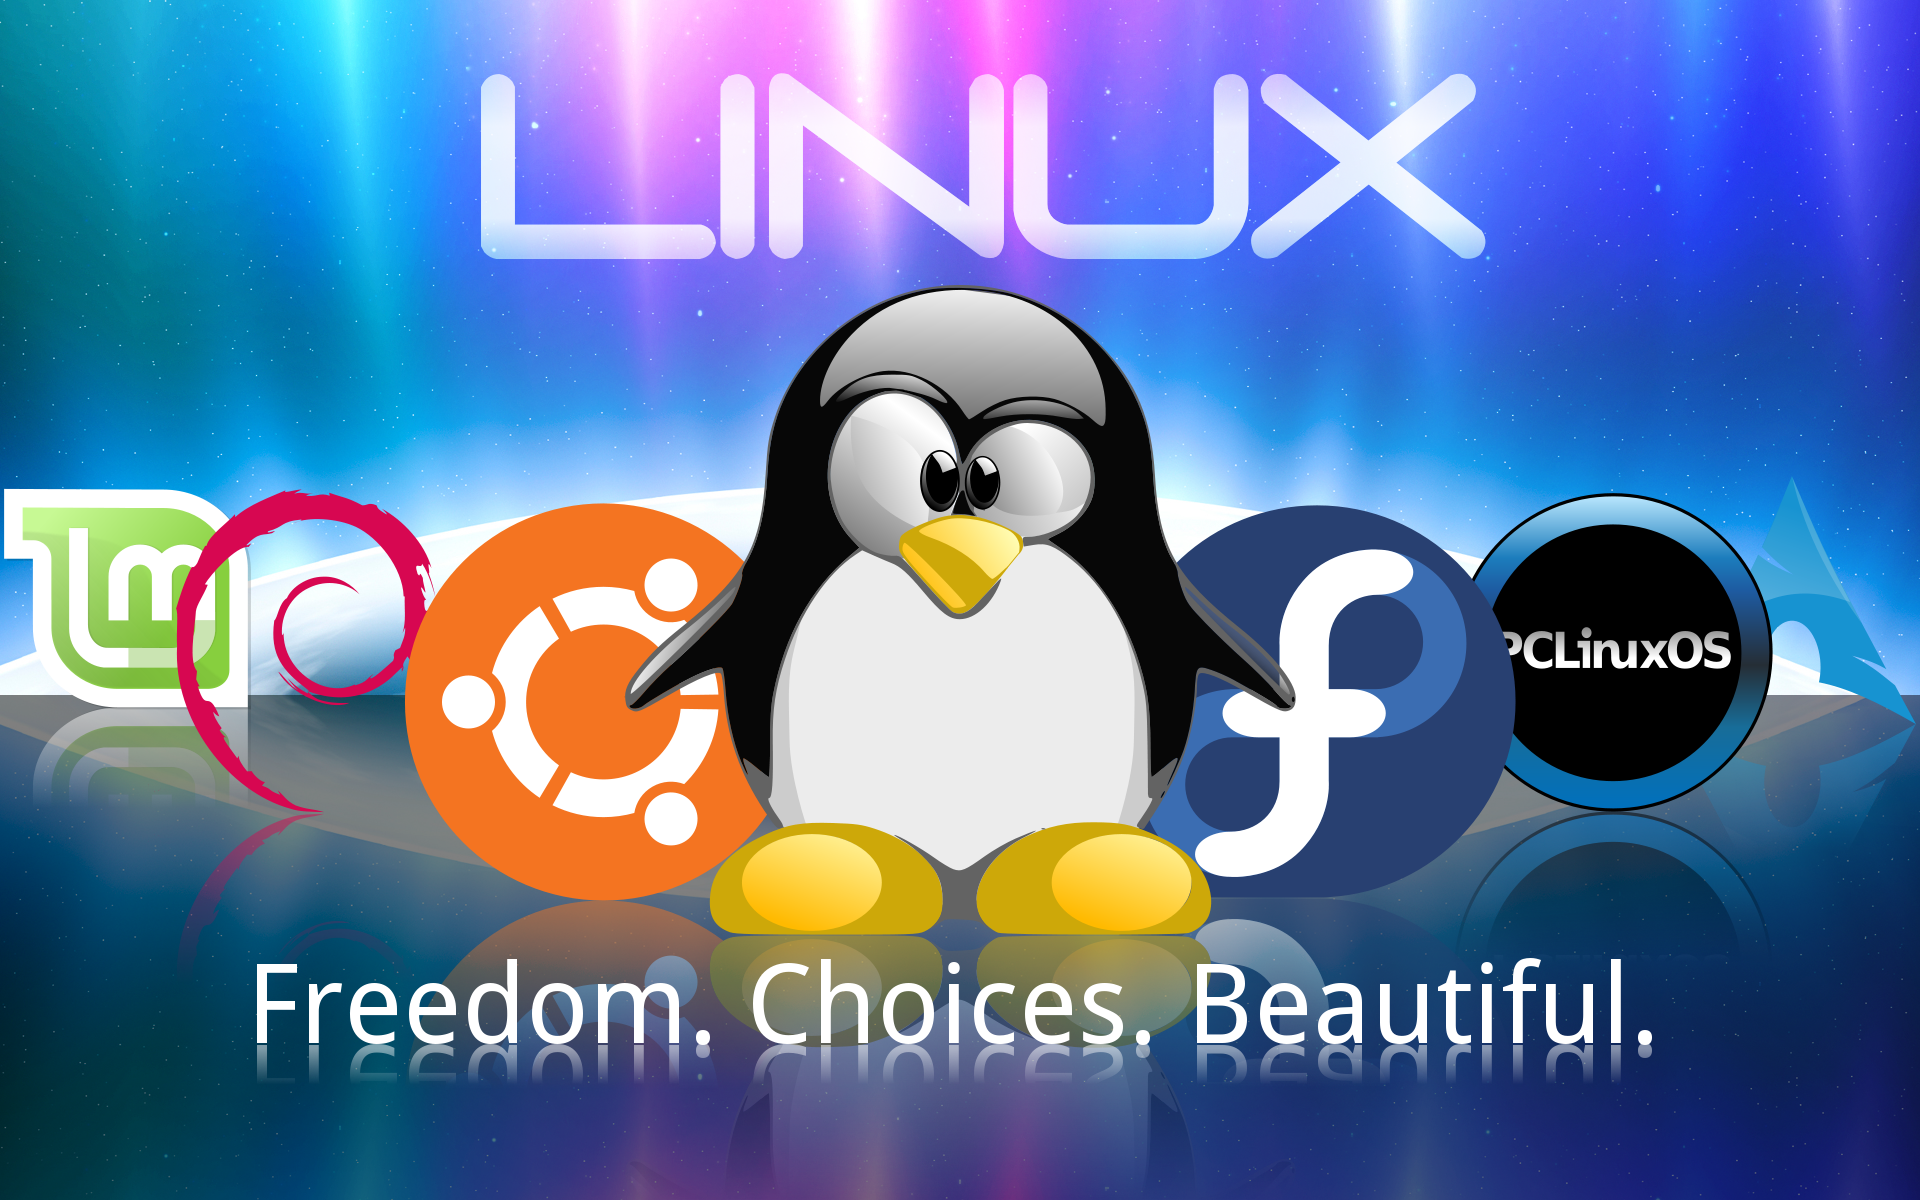 How Flexible & Free is Linux?